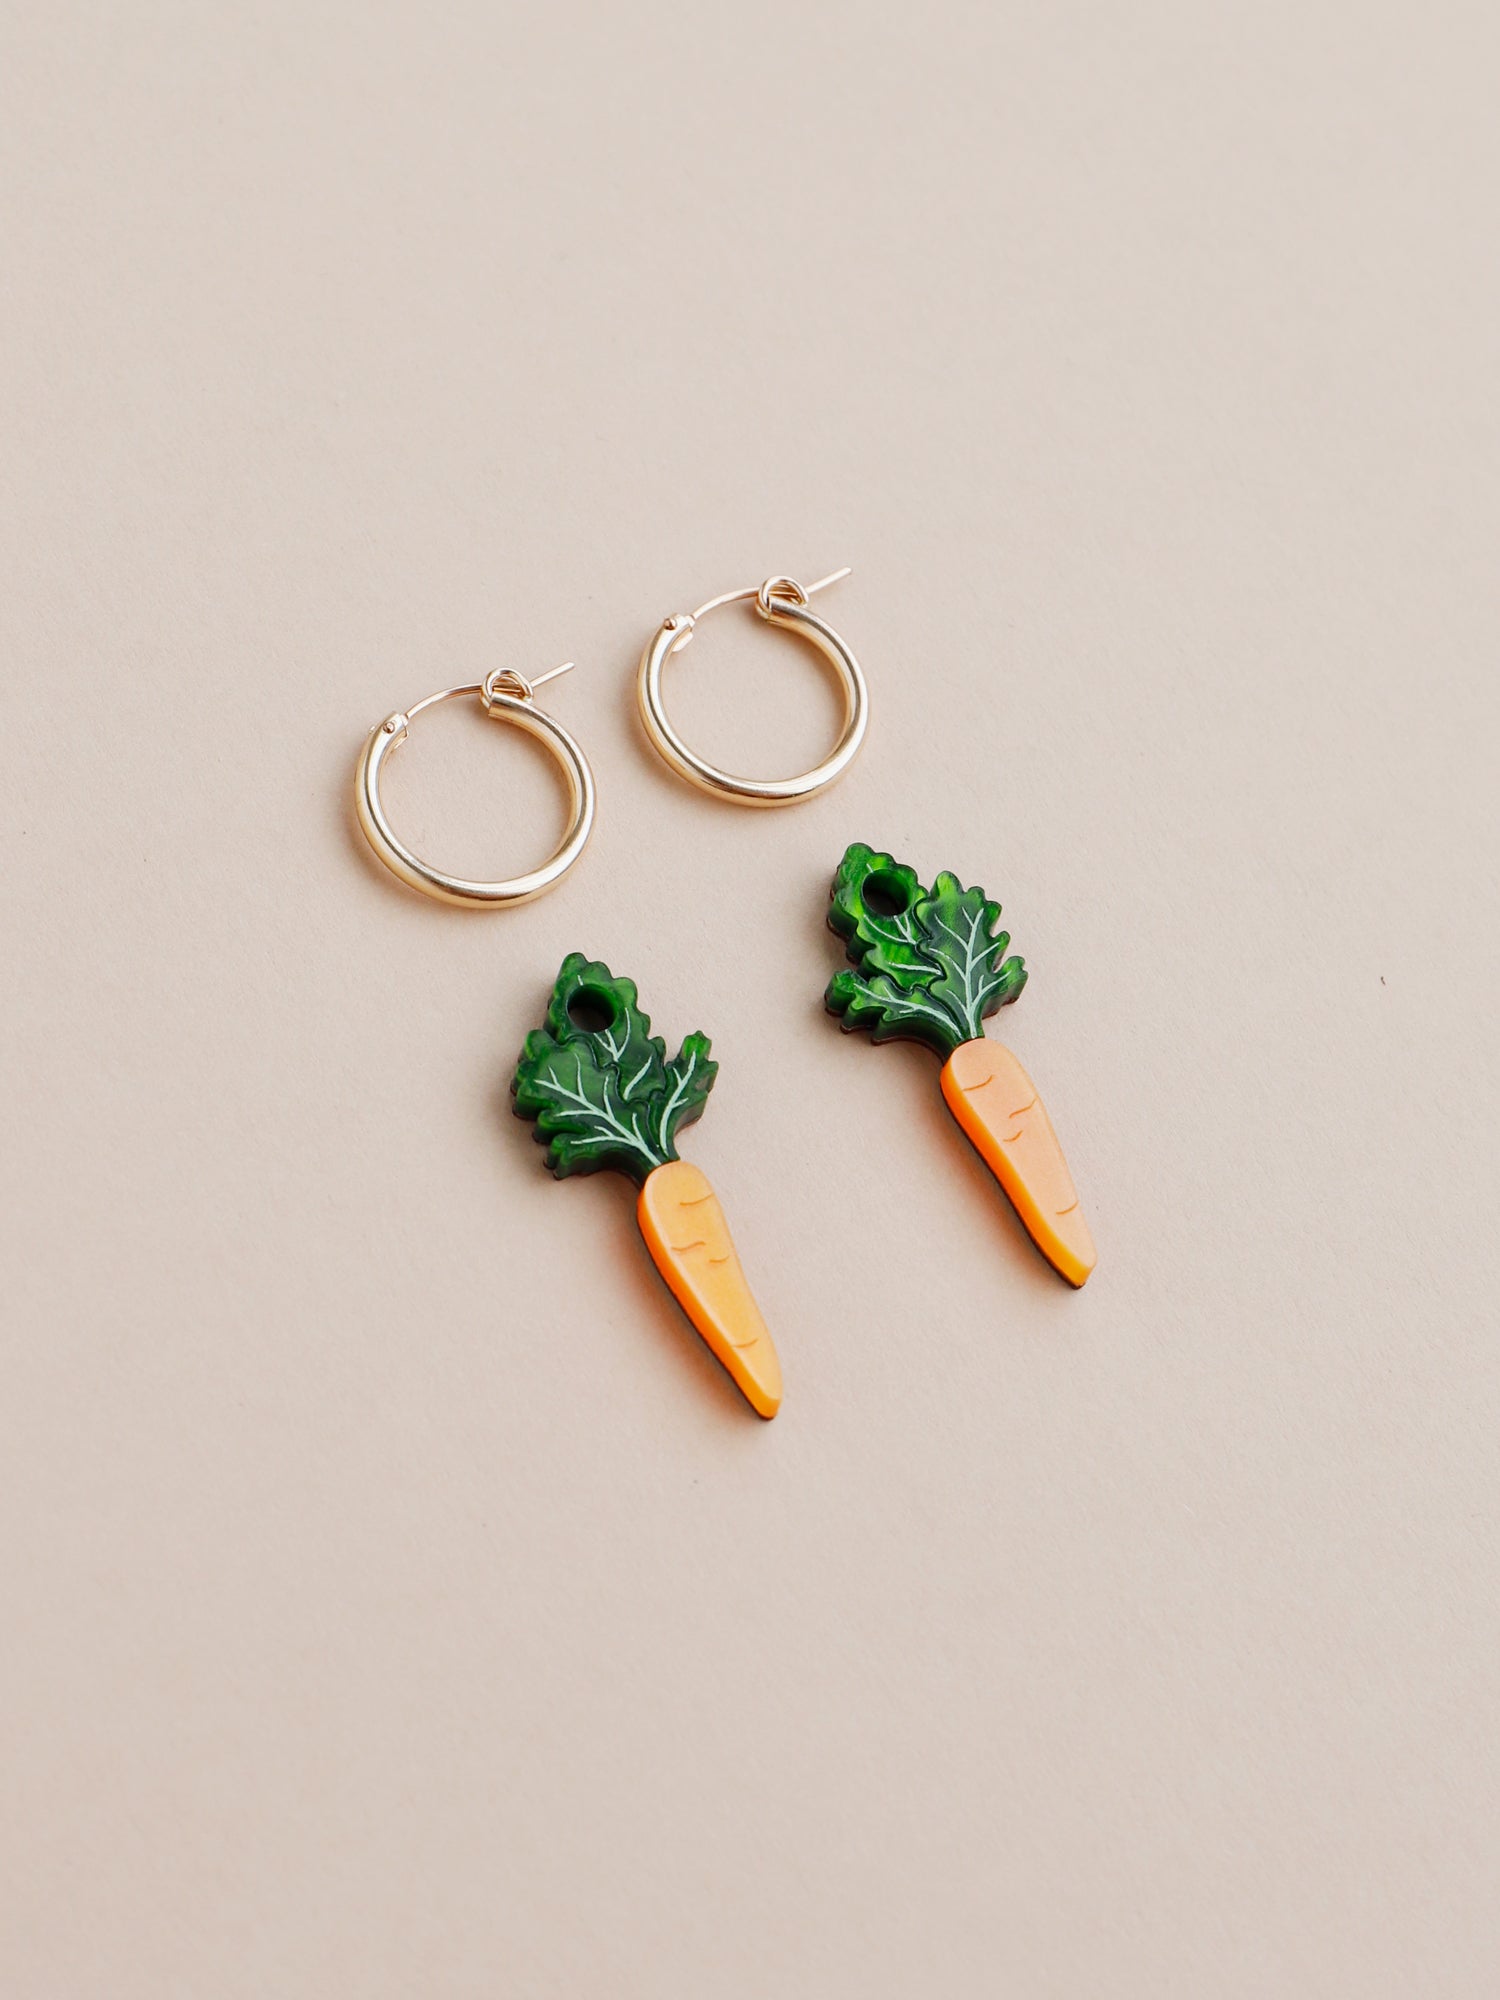 Orange and green carrot charm acrylic earrings with optional gold-filled hoops. Handmade in London by Wolf & Moon.